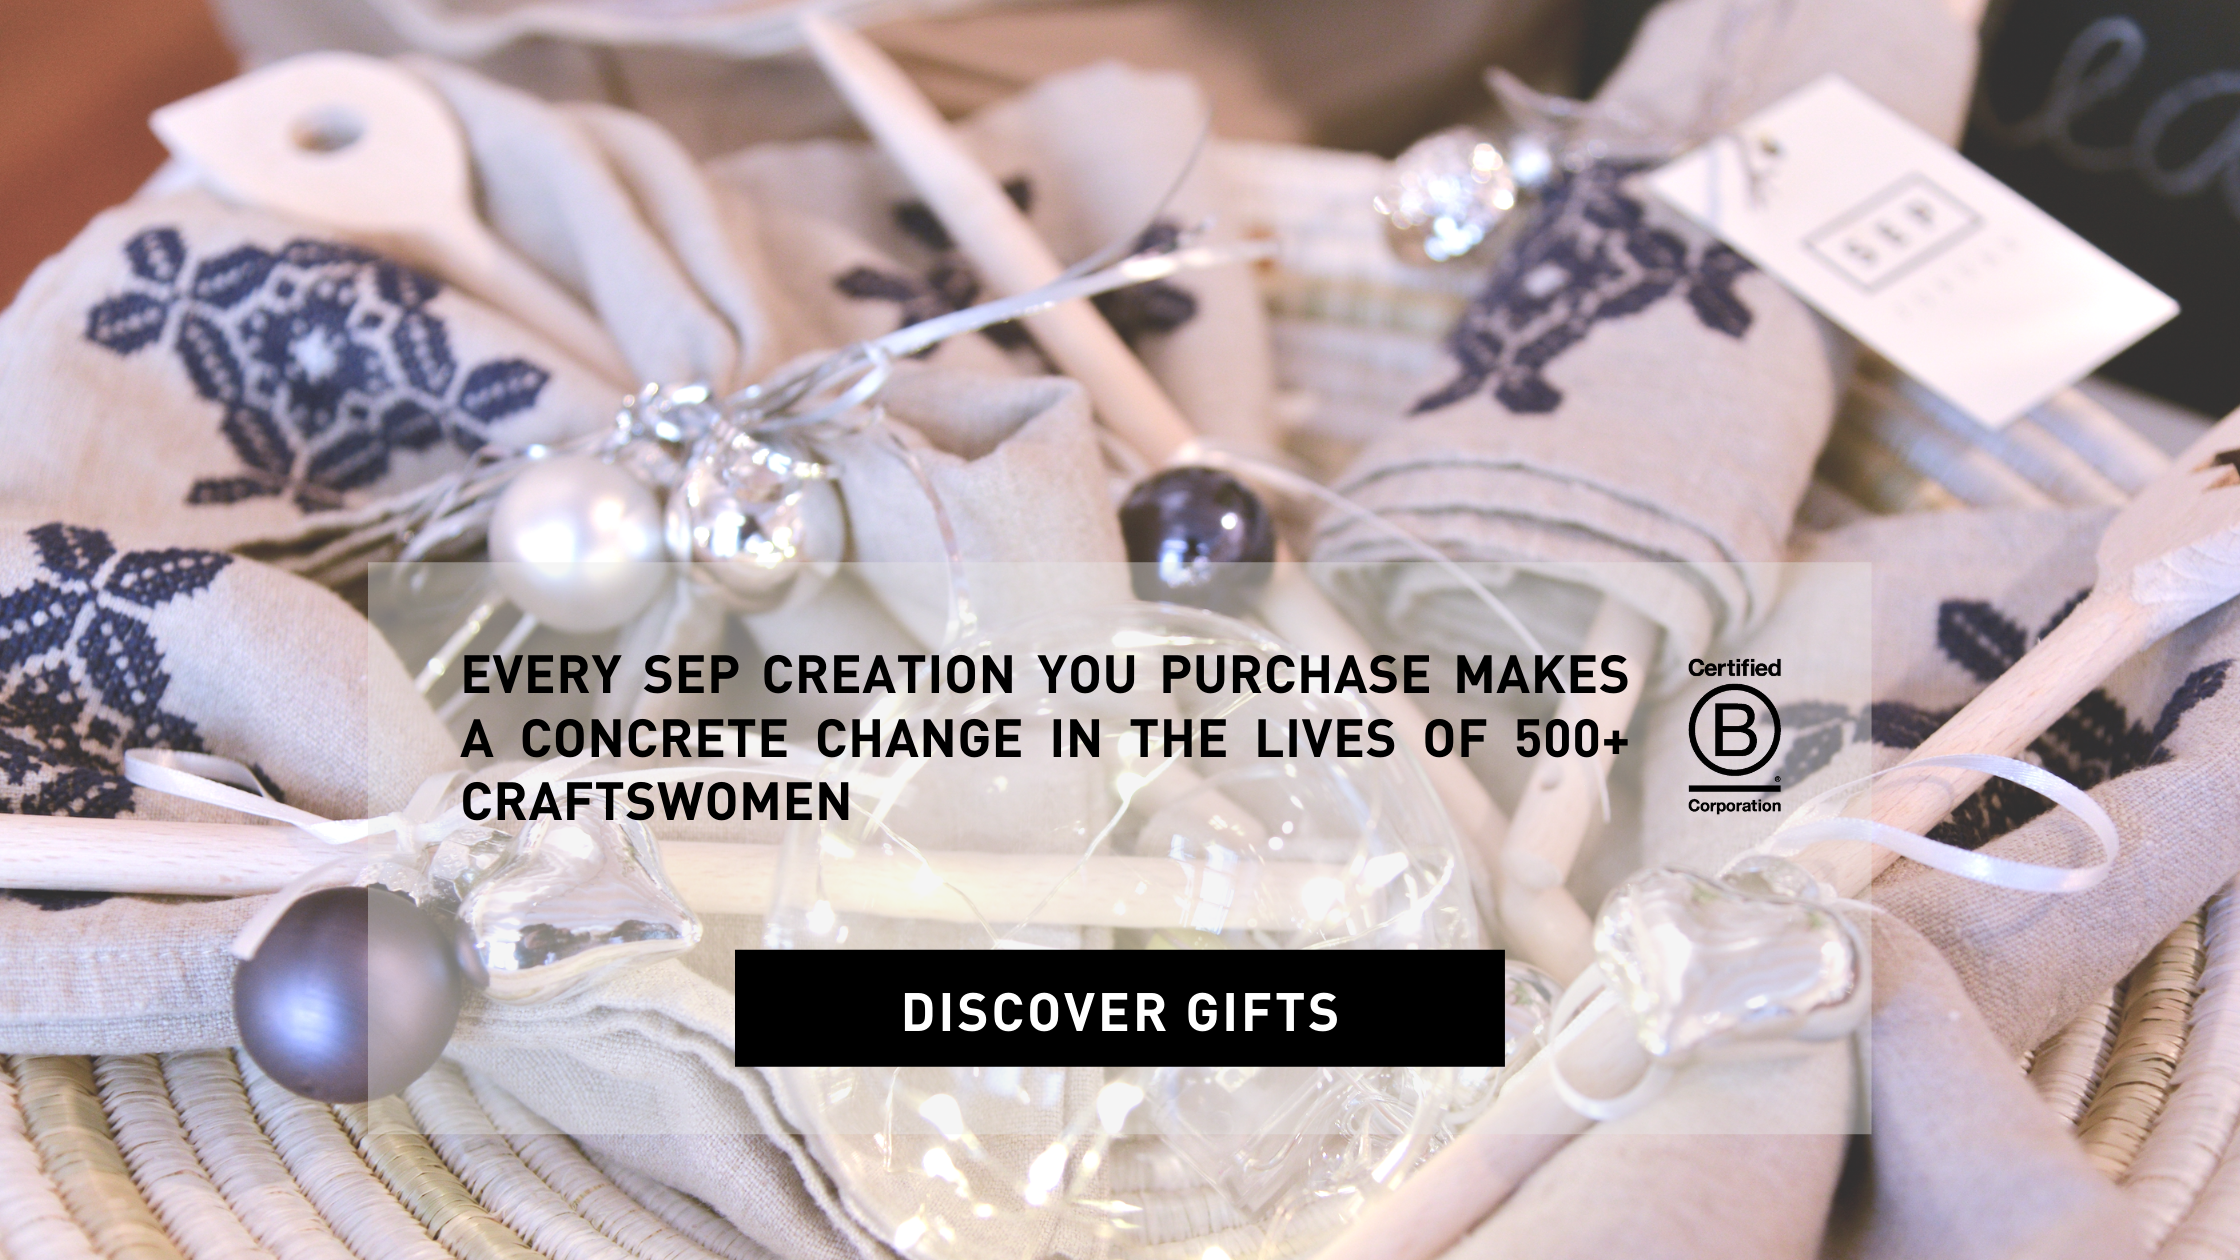 EVERY SEP CREATION YOU PURCHASE makes a concrete change in the lives of 500+ craftswomen DISCOVER GIFTS